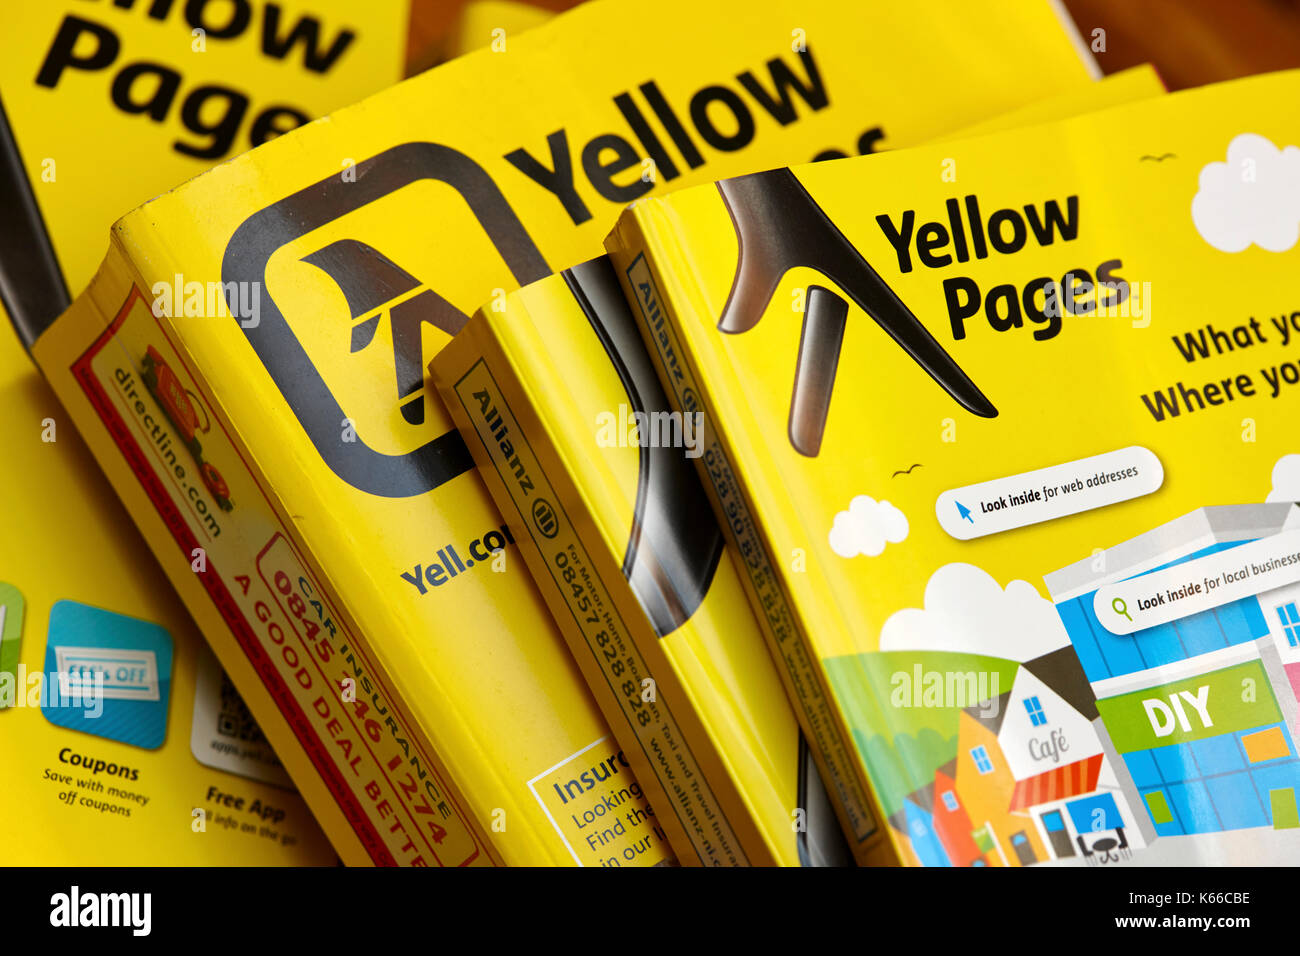 phone book yellow pages